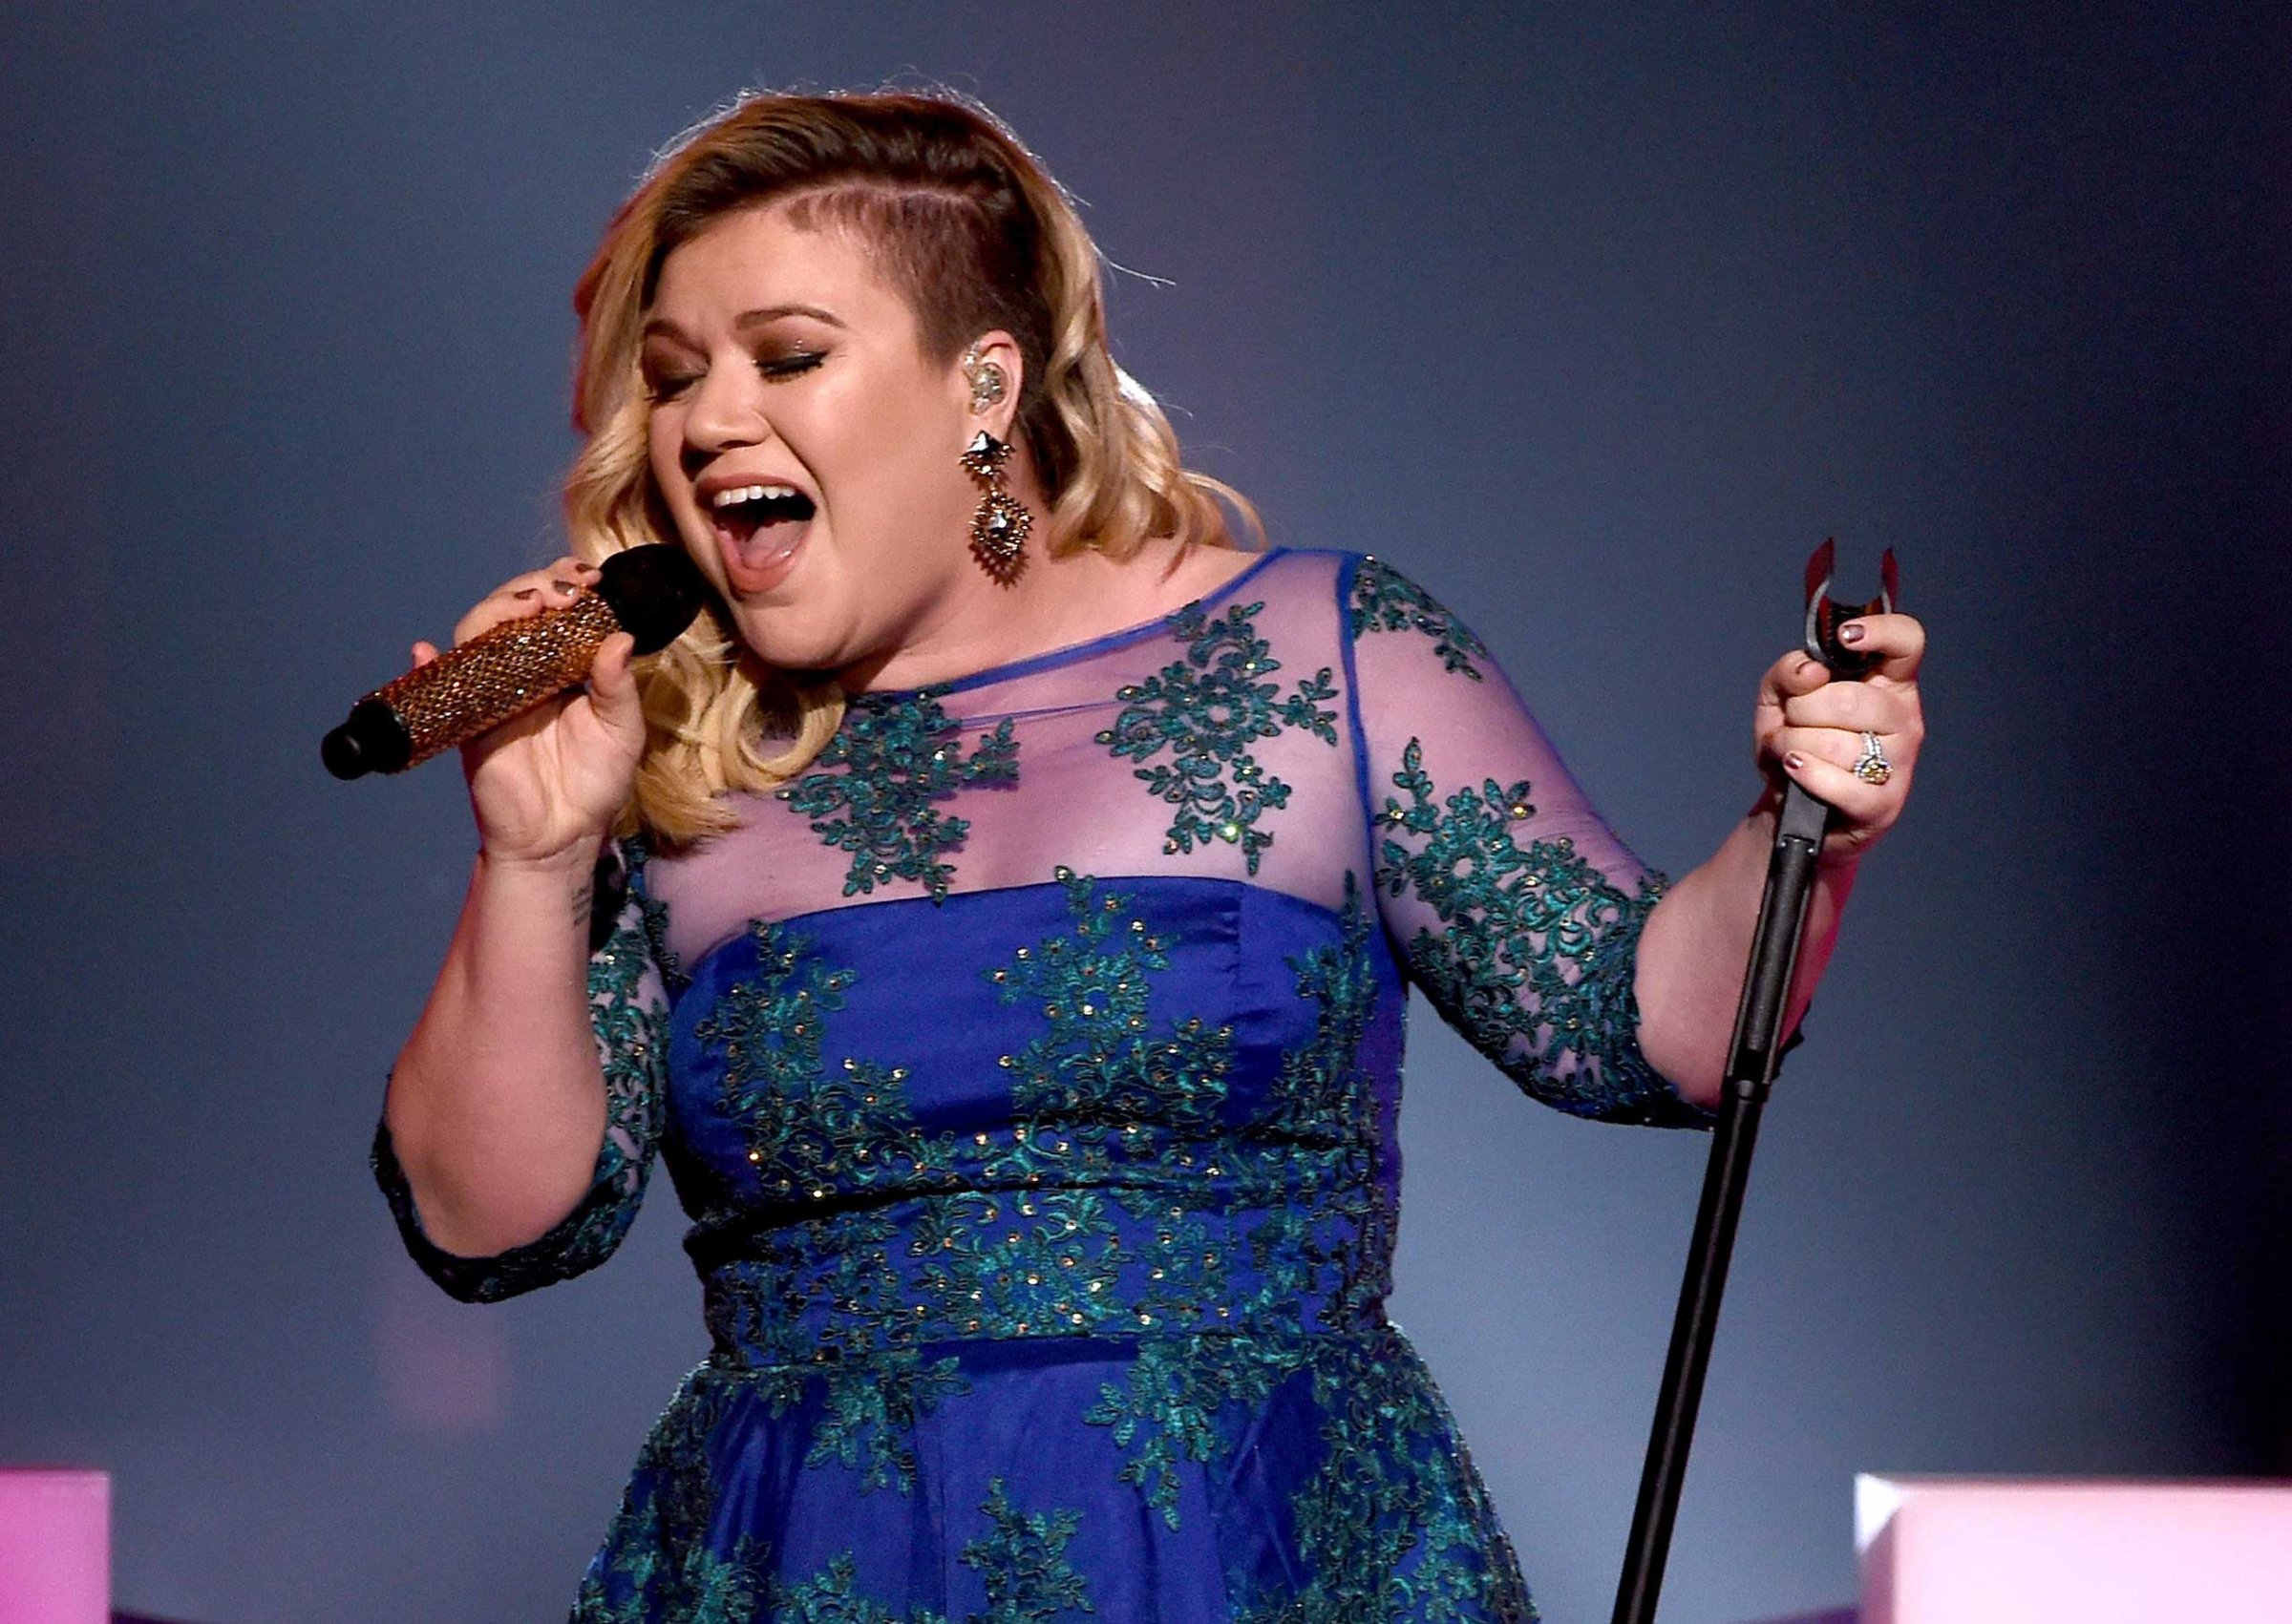 Singer Kelly Clarkson performs during the 2015 iHeartRadio Music Awards which broadcasted live on NBC from The Shrine Auditorium in Los Angeles on March 29, 2015.